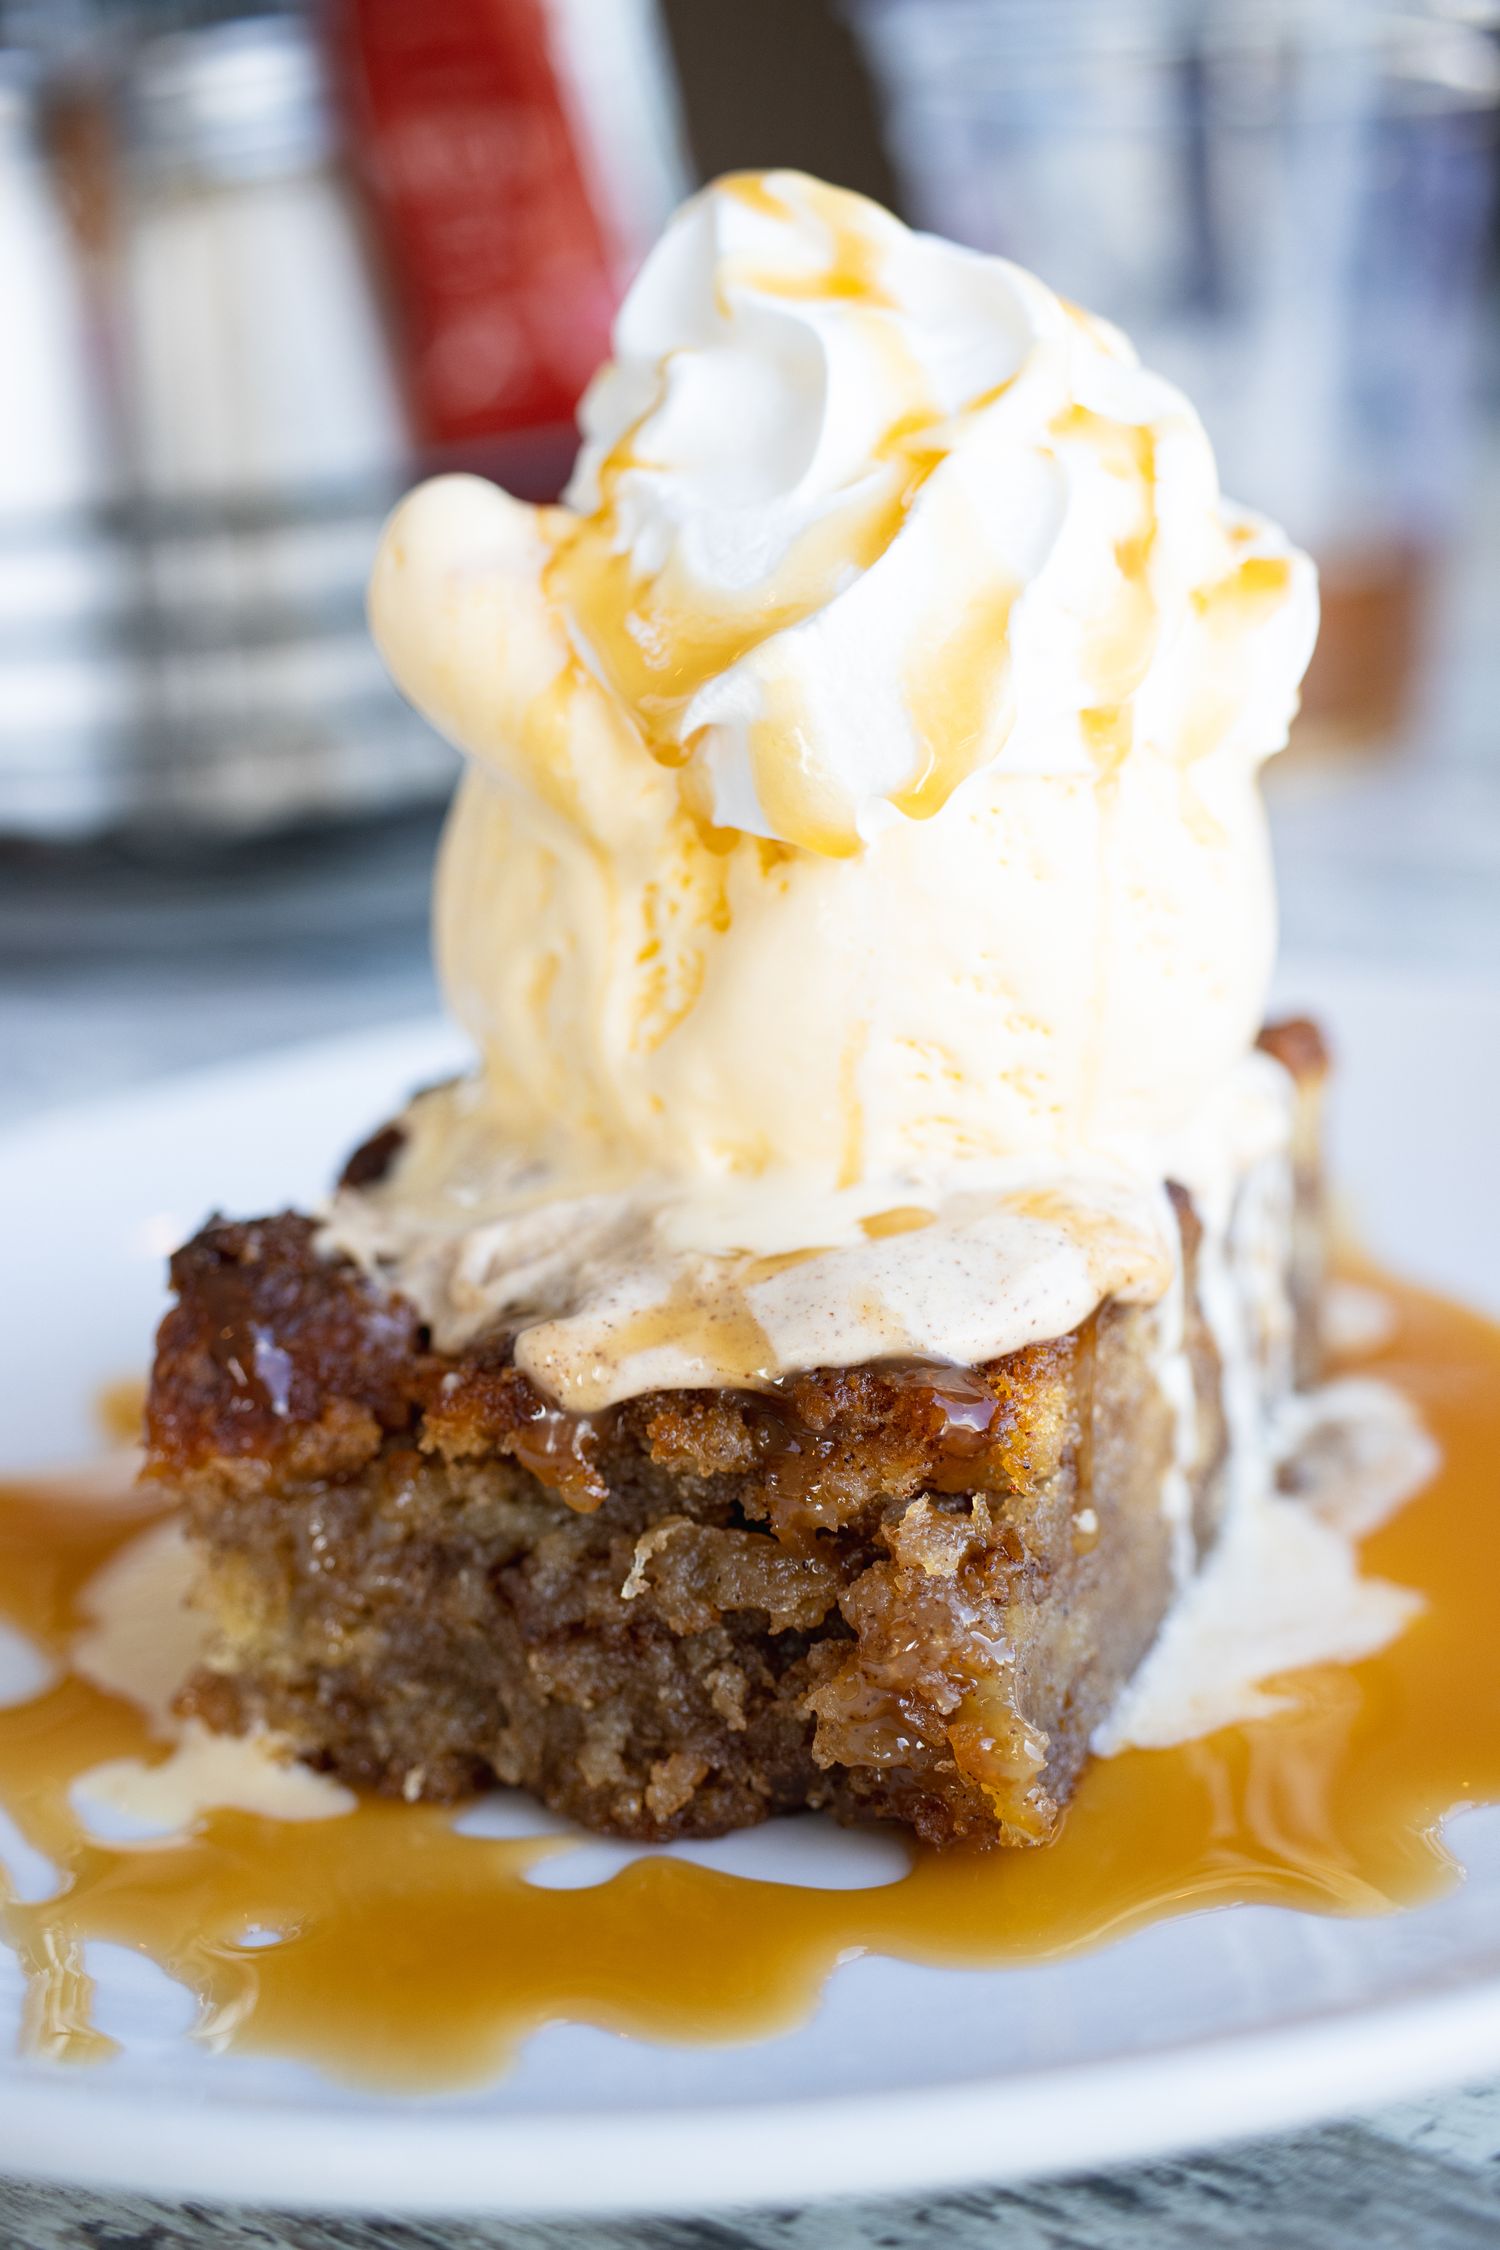 Cinnamon Bread Pudding with a heaping pile of ice cream and whipped cream.